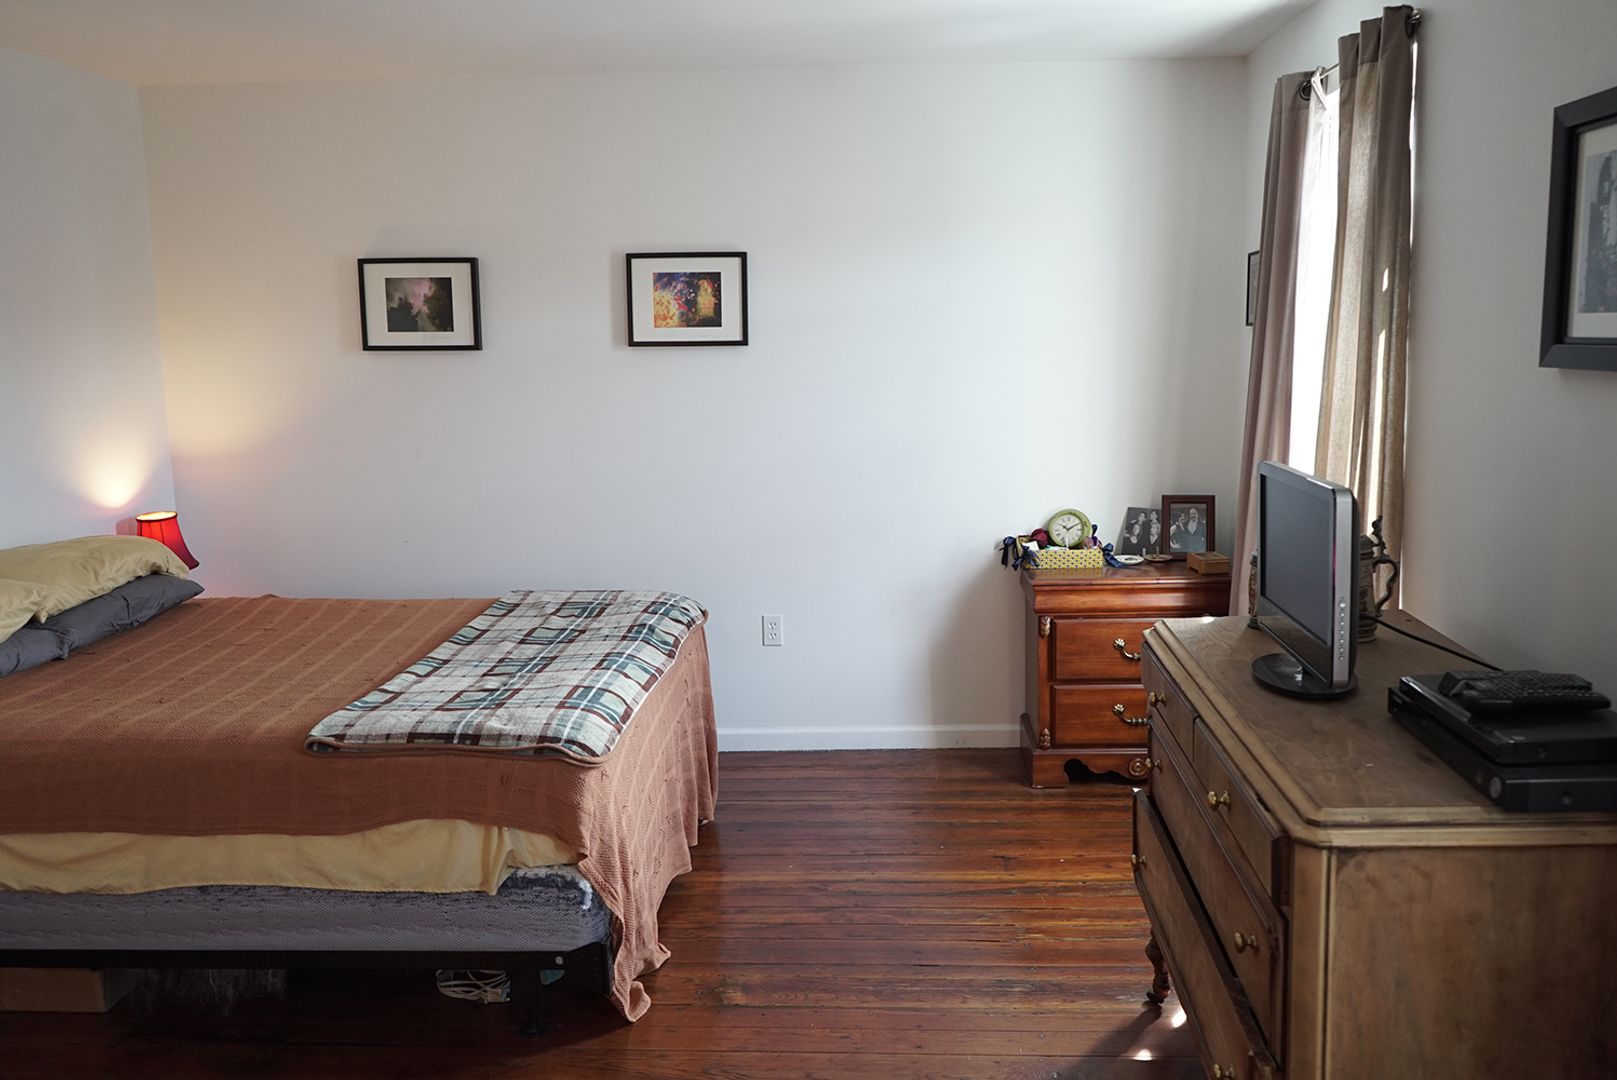 Charming 2-bedroom apartment in 829 North 26th Street.